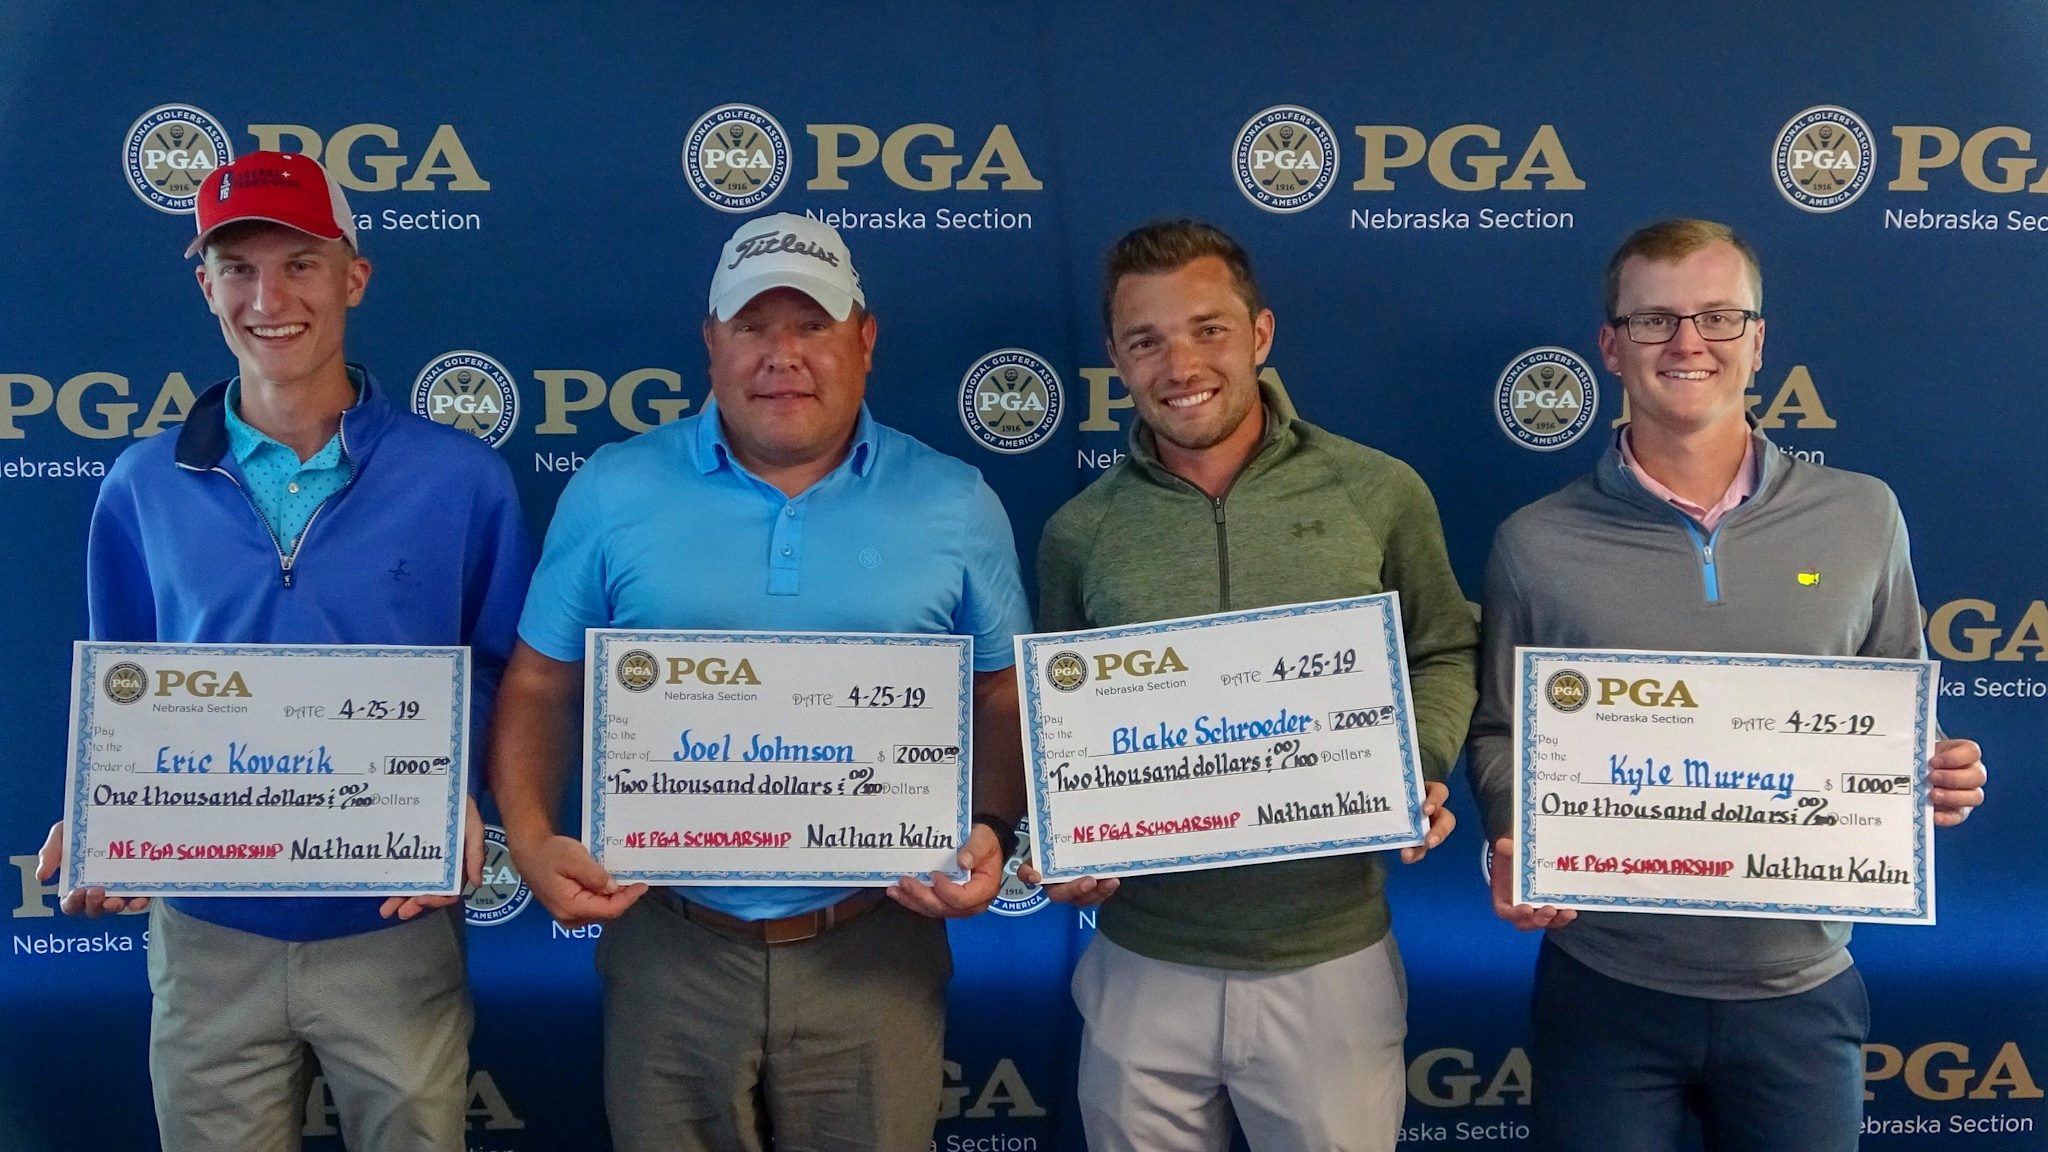 Recipients of the Nebraska Section of the PGA Scholarships from left to right are Eric Kovarik, Joel Johnson, Blake Schroeder, and Kyle Murray